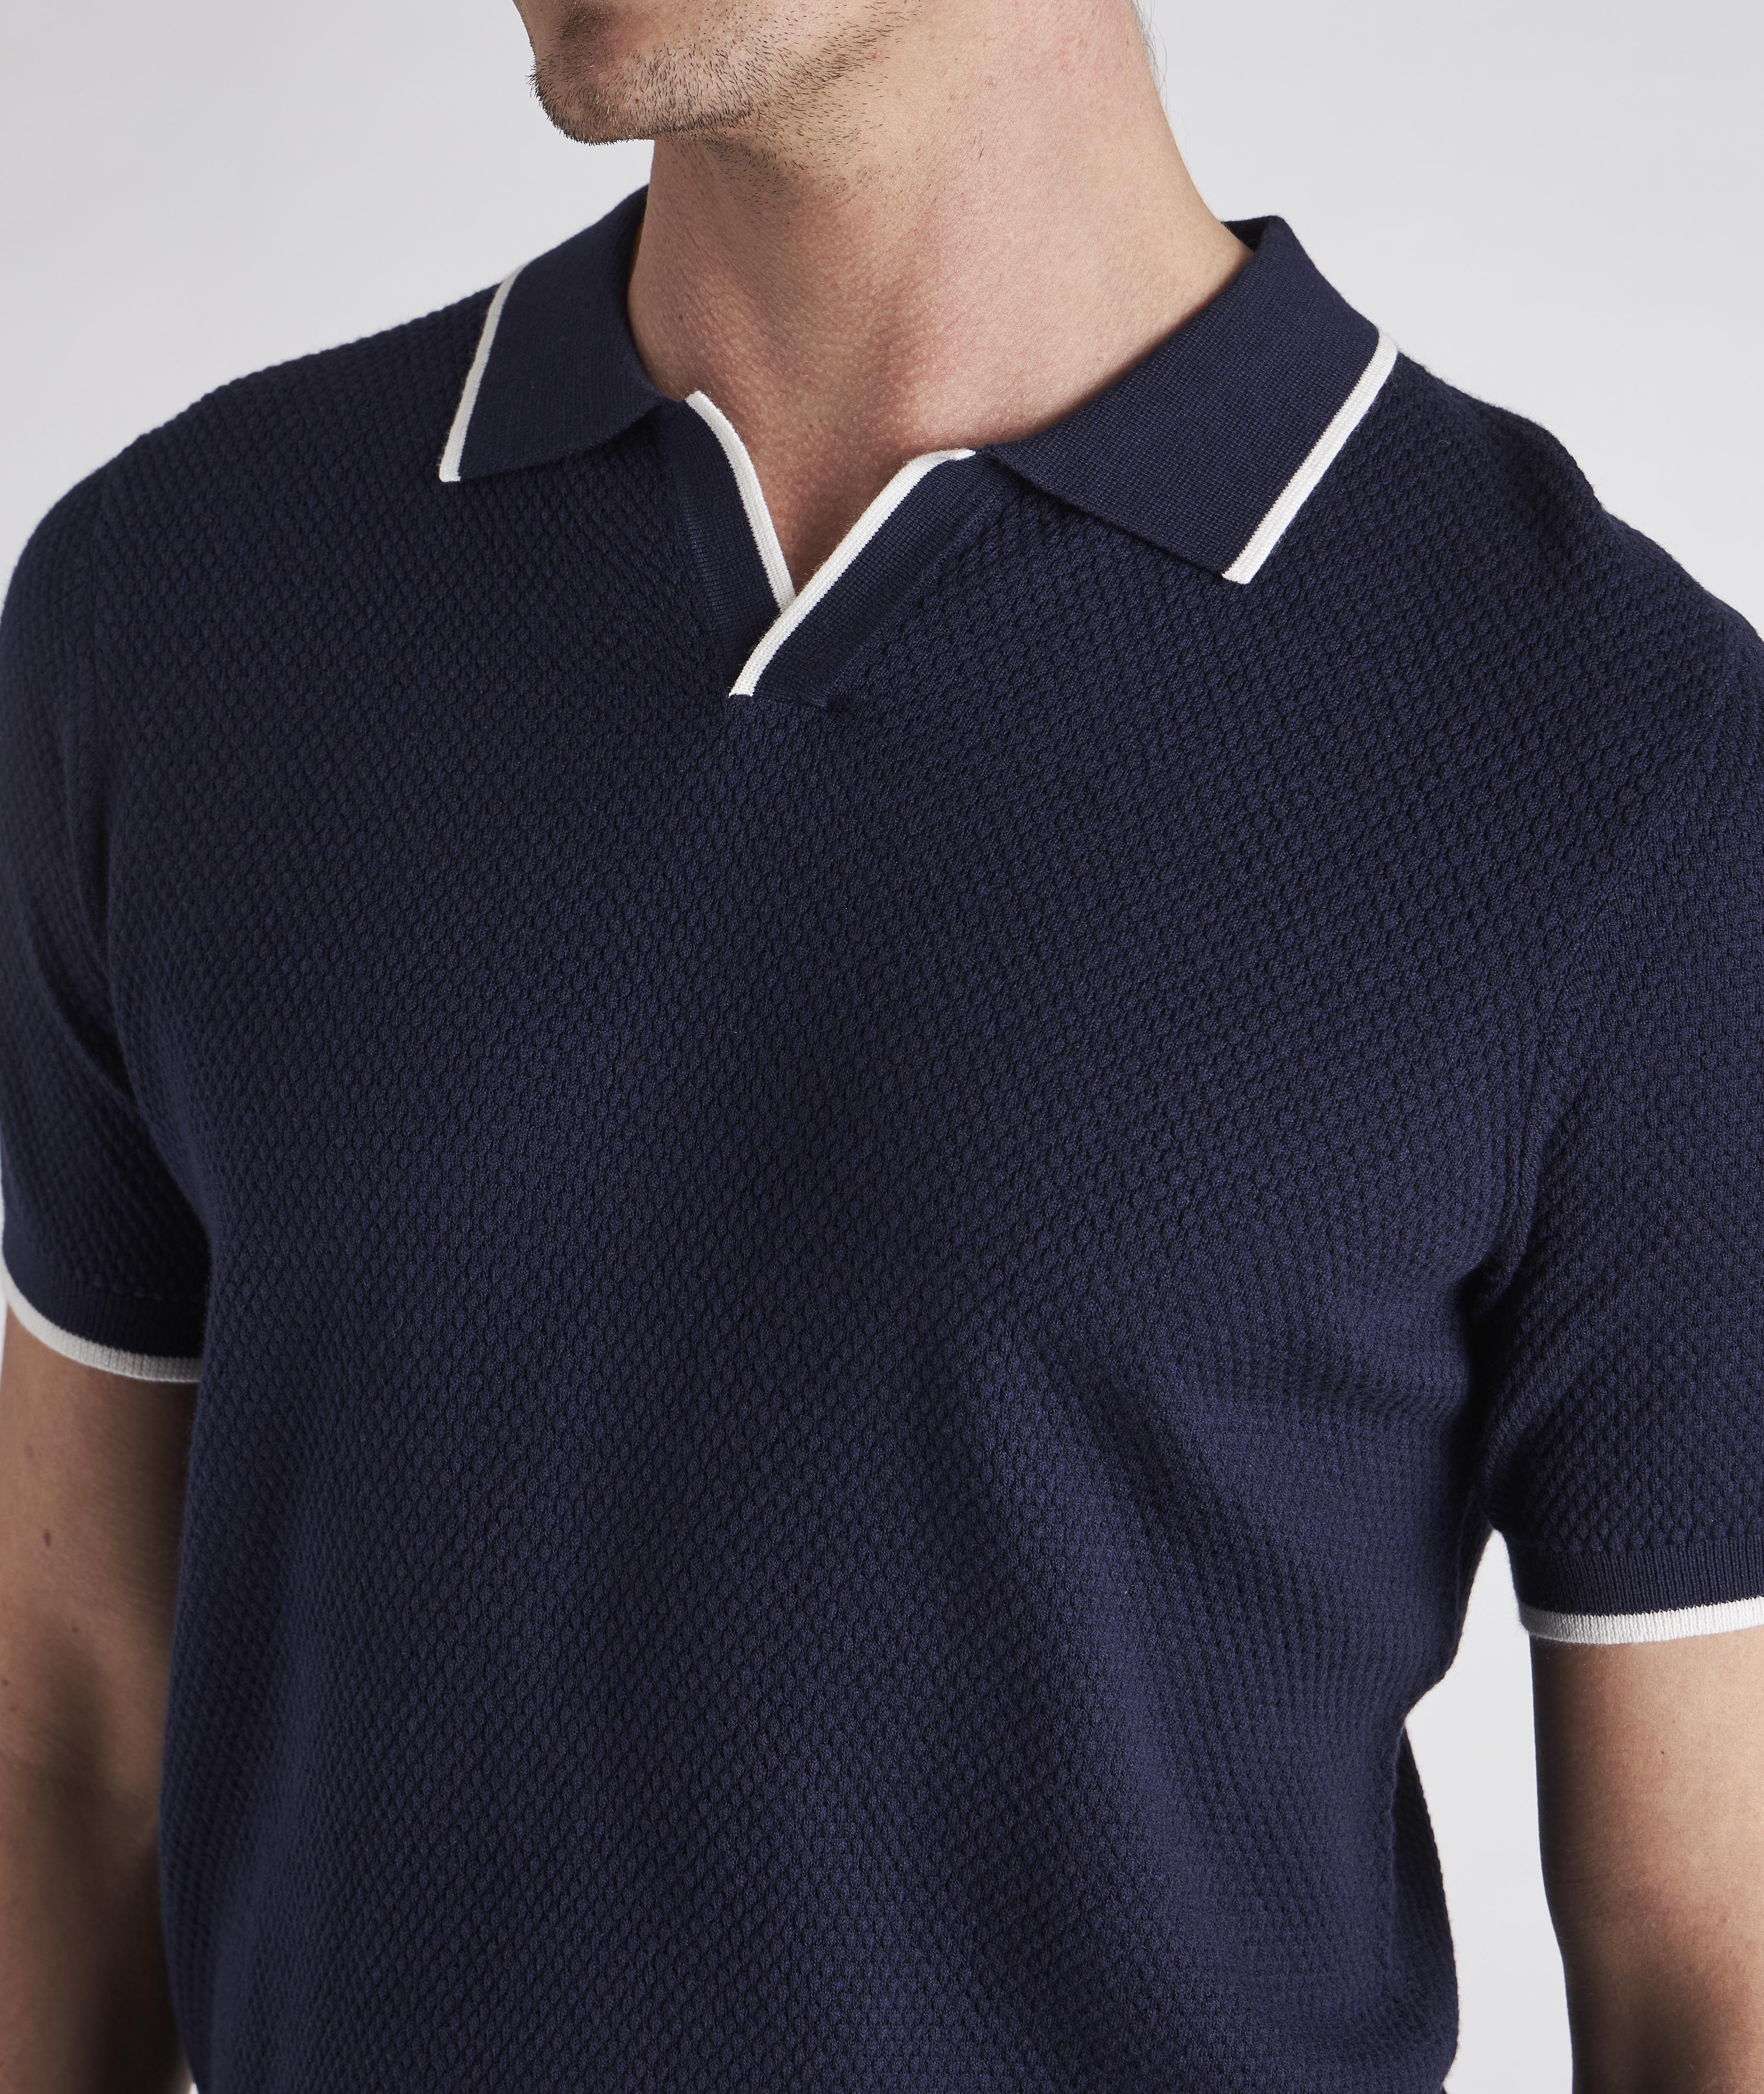 Textured Knit Johnny Collar Polo image 4